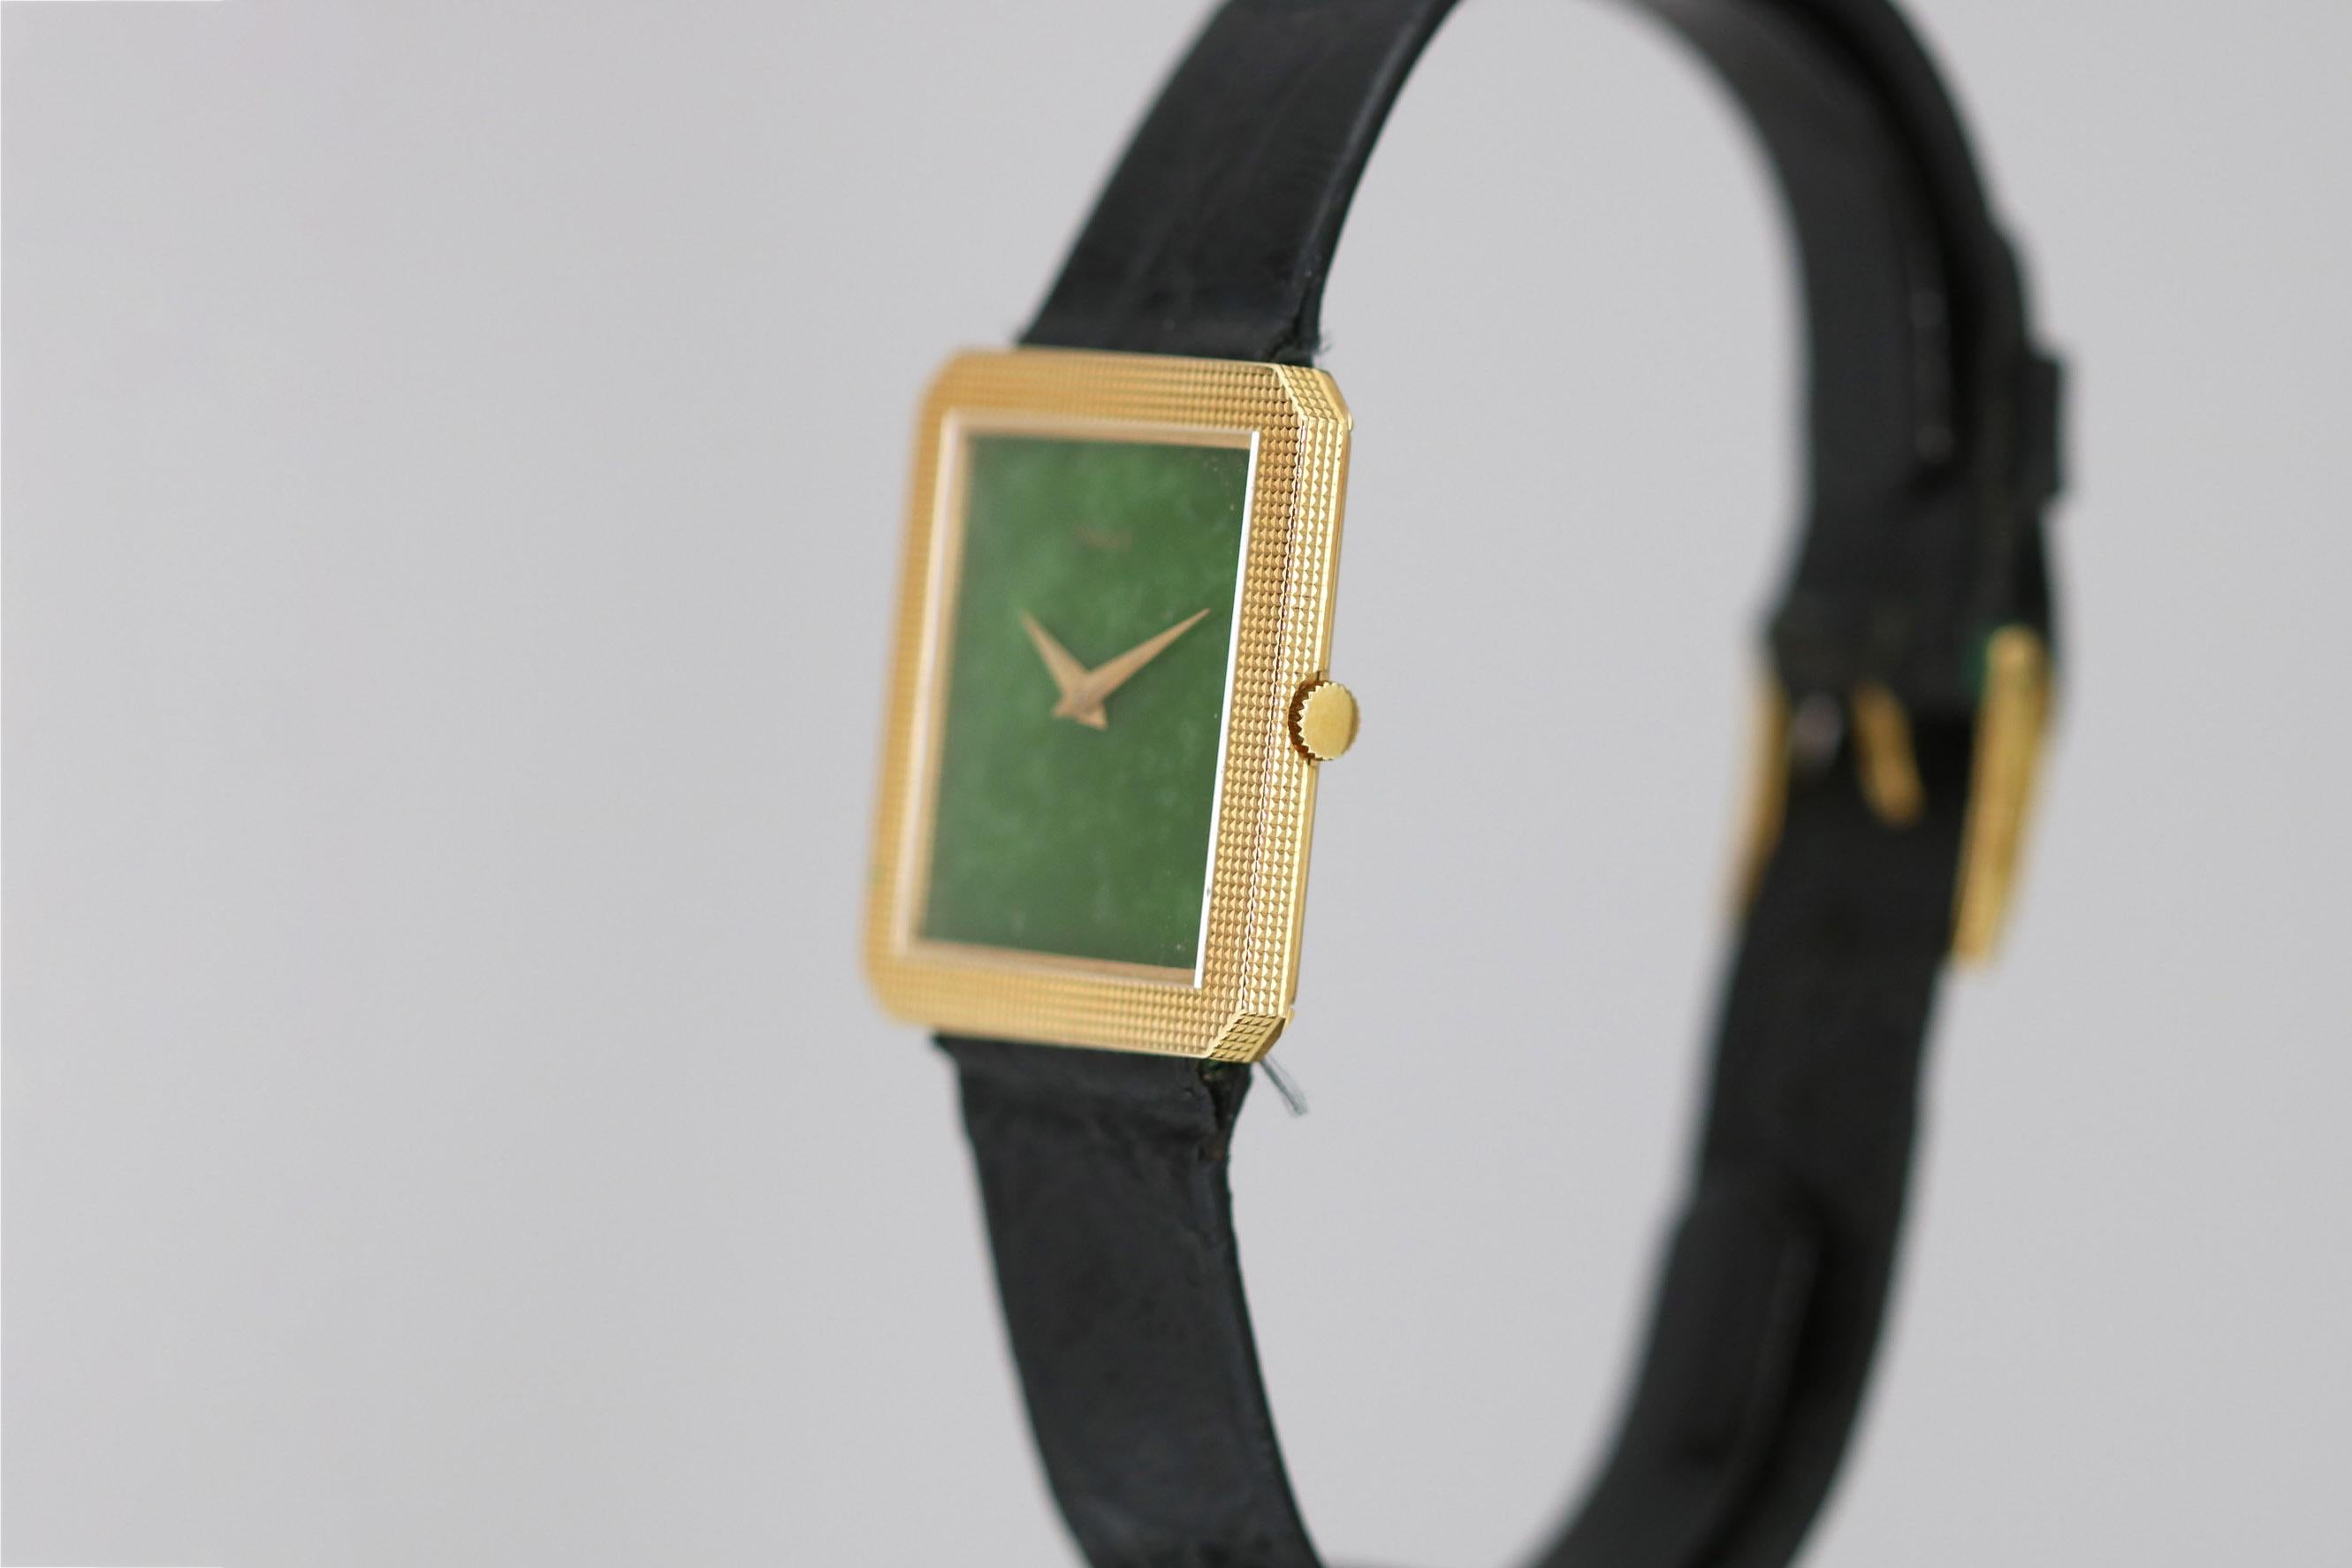 Piaget wristwatch with a rectangle ribbed 18k yellow gold case, green jade dial, manual wind movement and is on a skin black strap with Piaget 18k yellow gold tang buckle. 25x27mm circa 1970s